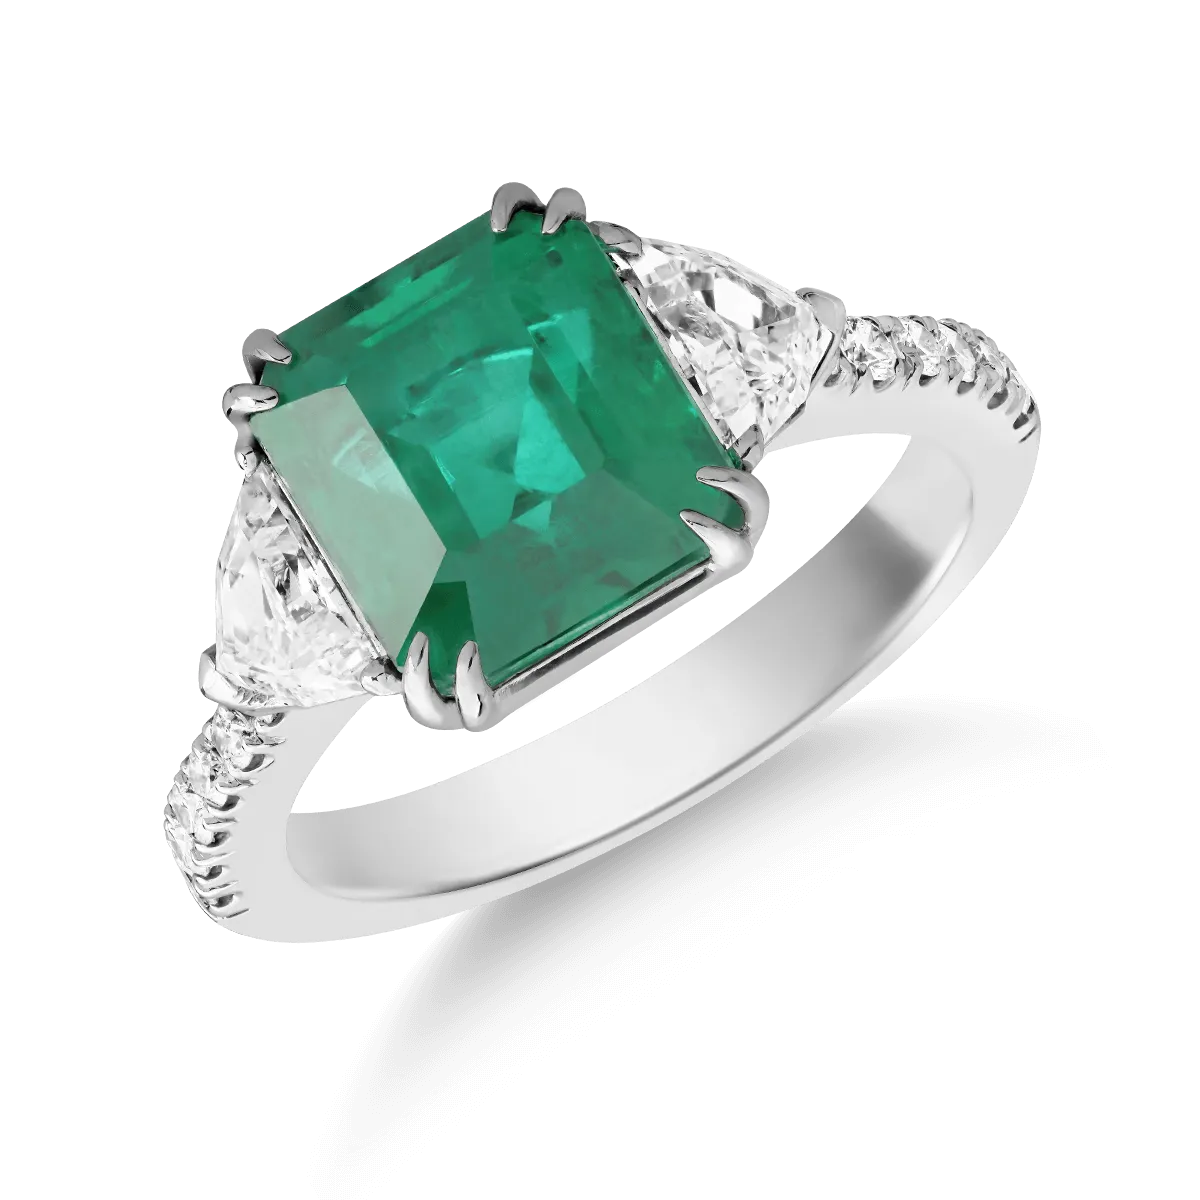 18K white gold ring with an 4.16ct emerald and 0.83ct diamonds